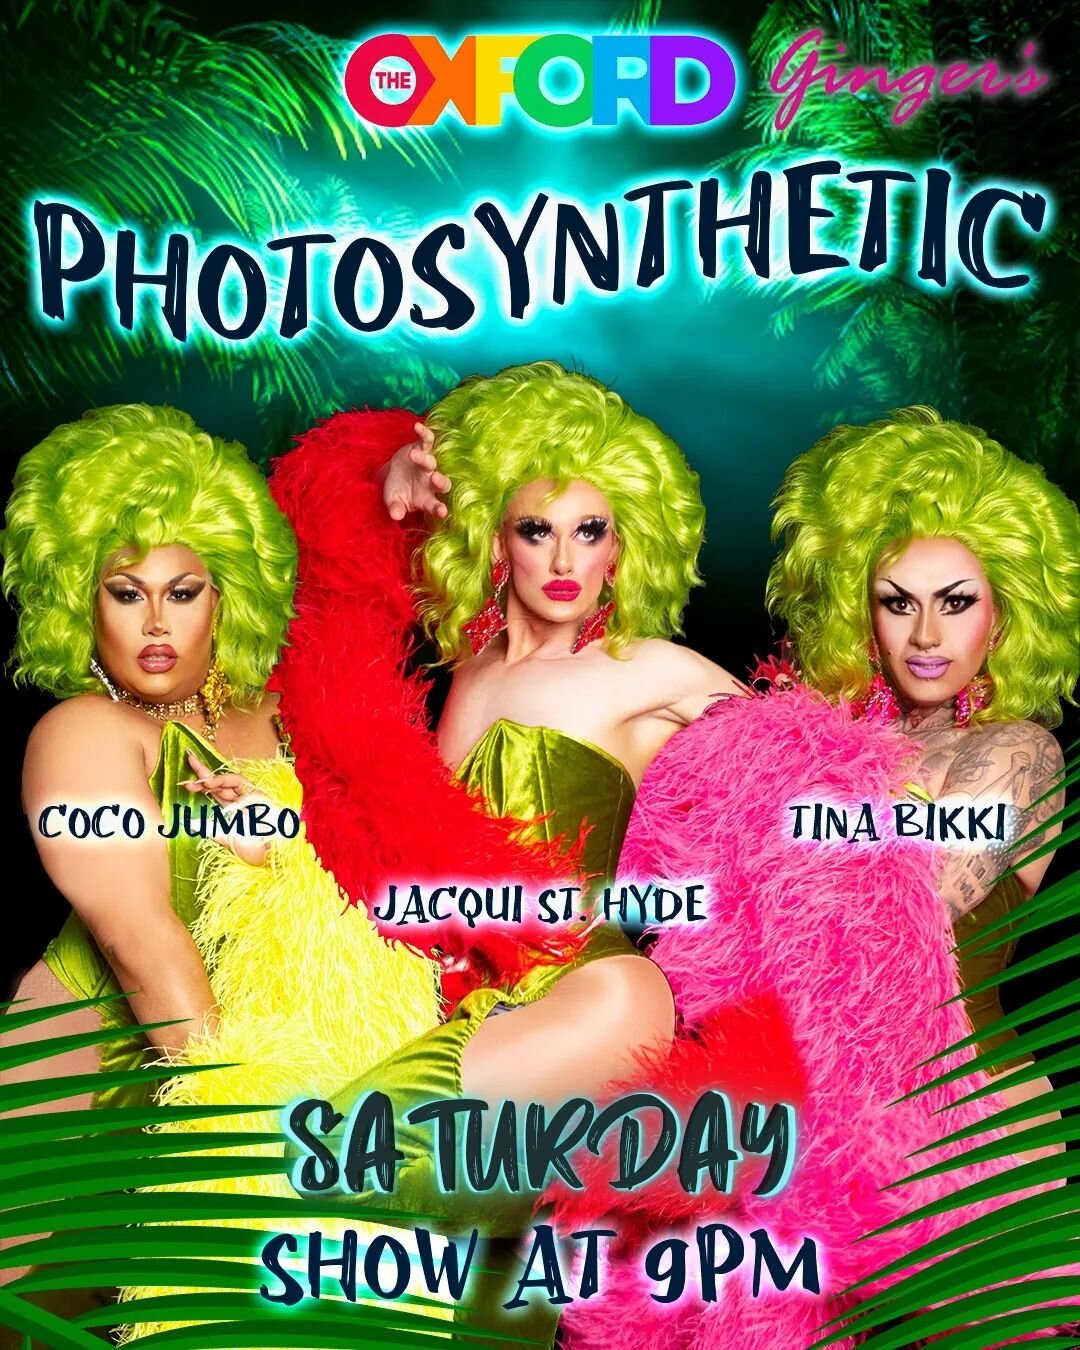 ℙℍ𝕆𝕋𝕆𝕊𝕐ℕ𝕋ℍ𝔼𝕋𝕀ℂ

Premieres tonight!! A new trio of superstar queens will take over Ginger's in an all new production feat @_cocojumbo @jaxhyde @tinabikki